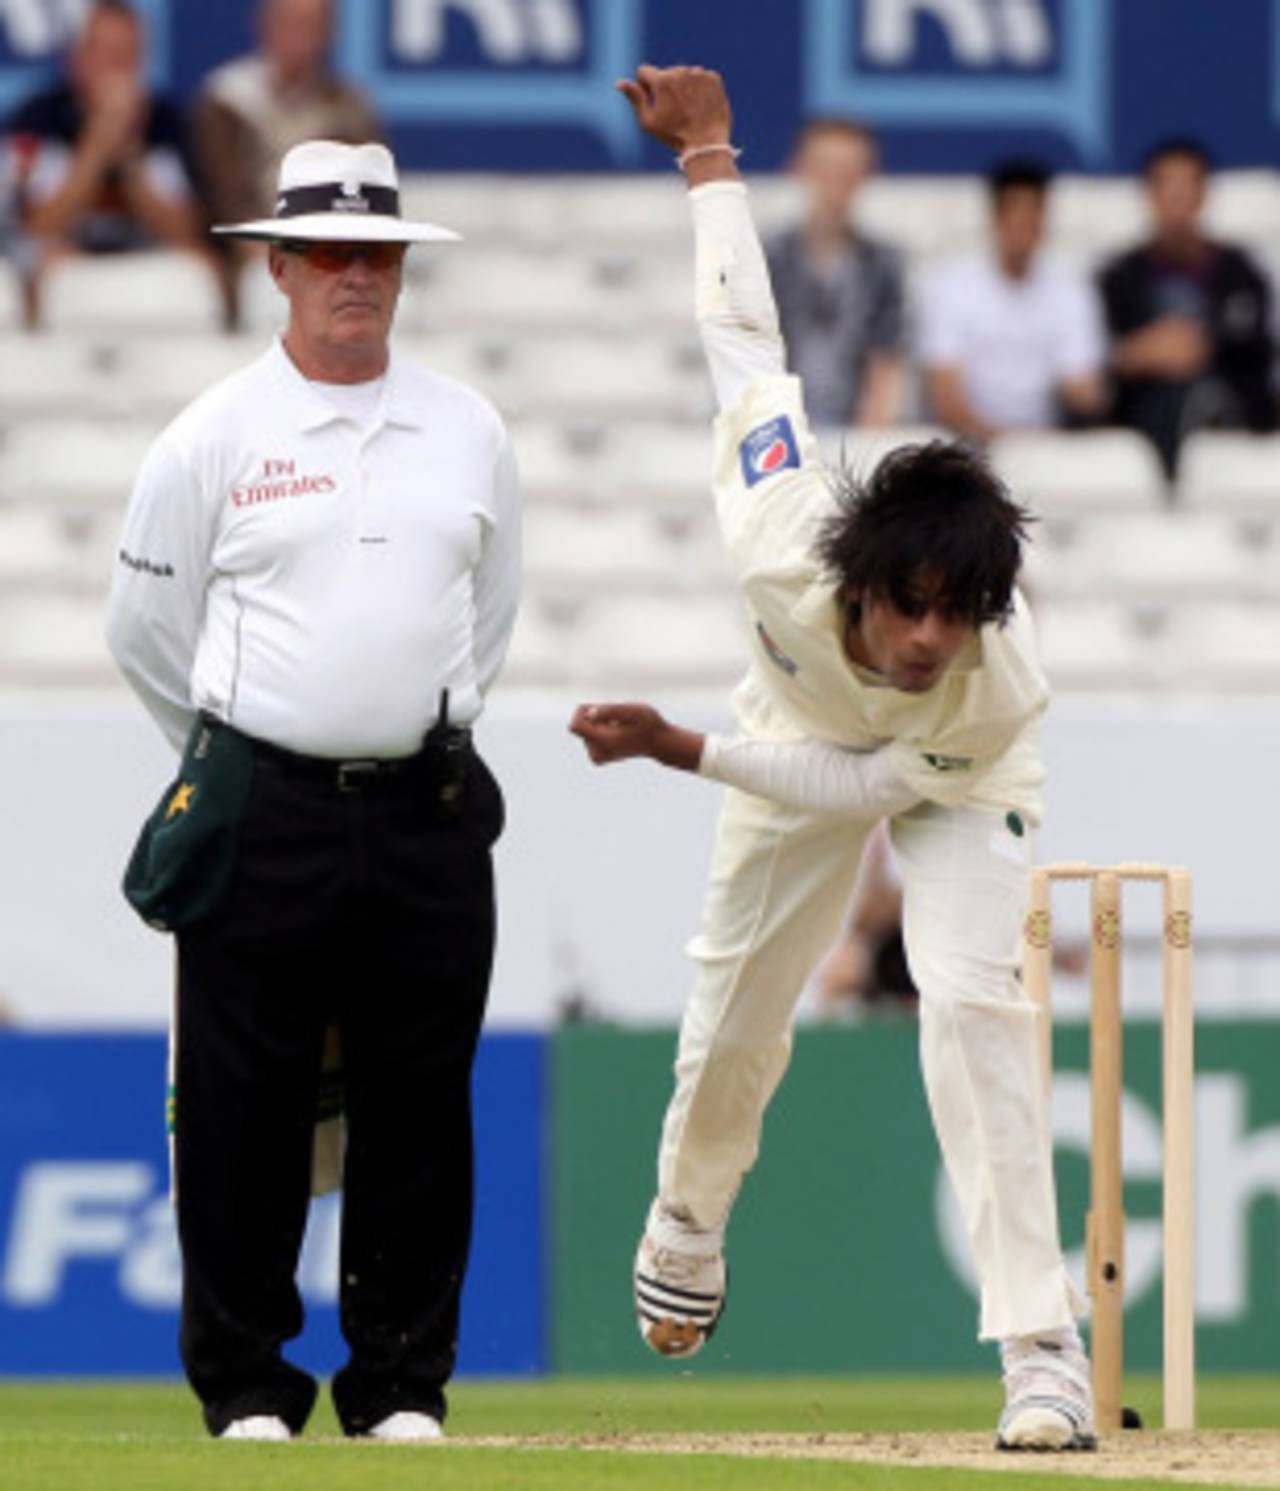 Mohammad Amir bowls during the second Test at Headingley, which will be Rudi Koertzen's last as an umpire, Pakistan v Australia, 2nd Test, Headingley, July 21, 2010